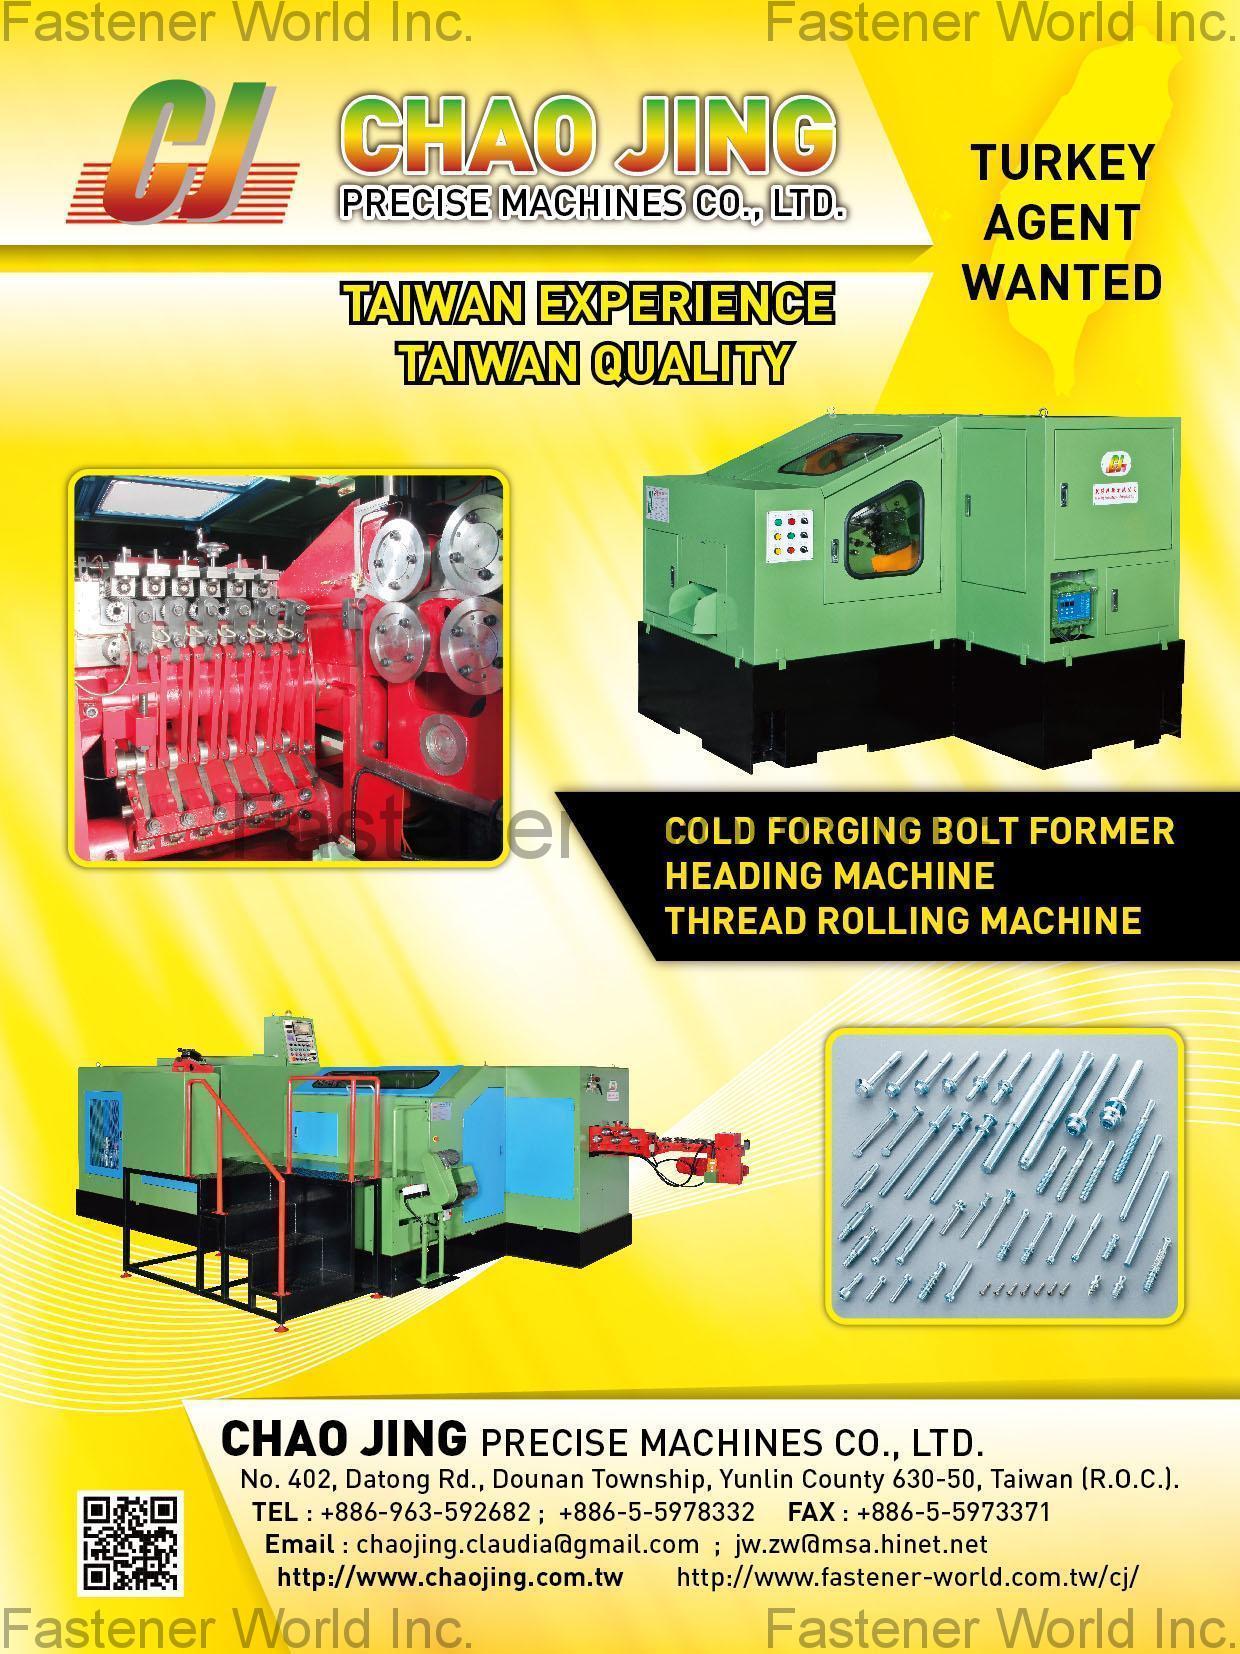 Chao Jing Precise Machines Enterprise Co., Ltd. (San Sing Screw Forming Machines) , Cold Forging Bolt Former, Heading Machine, Thread Rolling Machine , Screw (Bolt) Formers